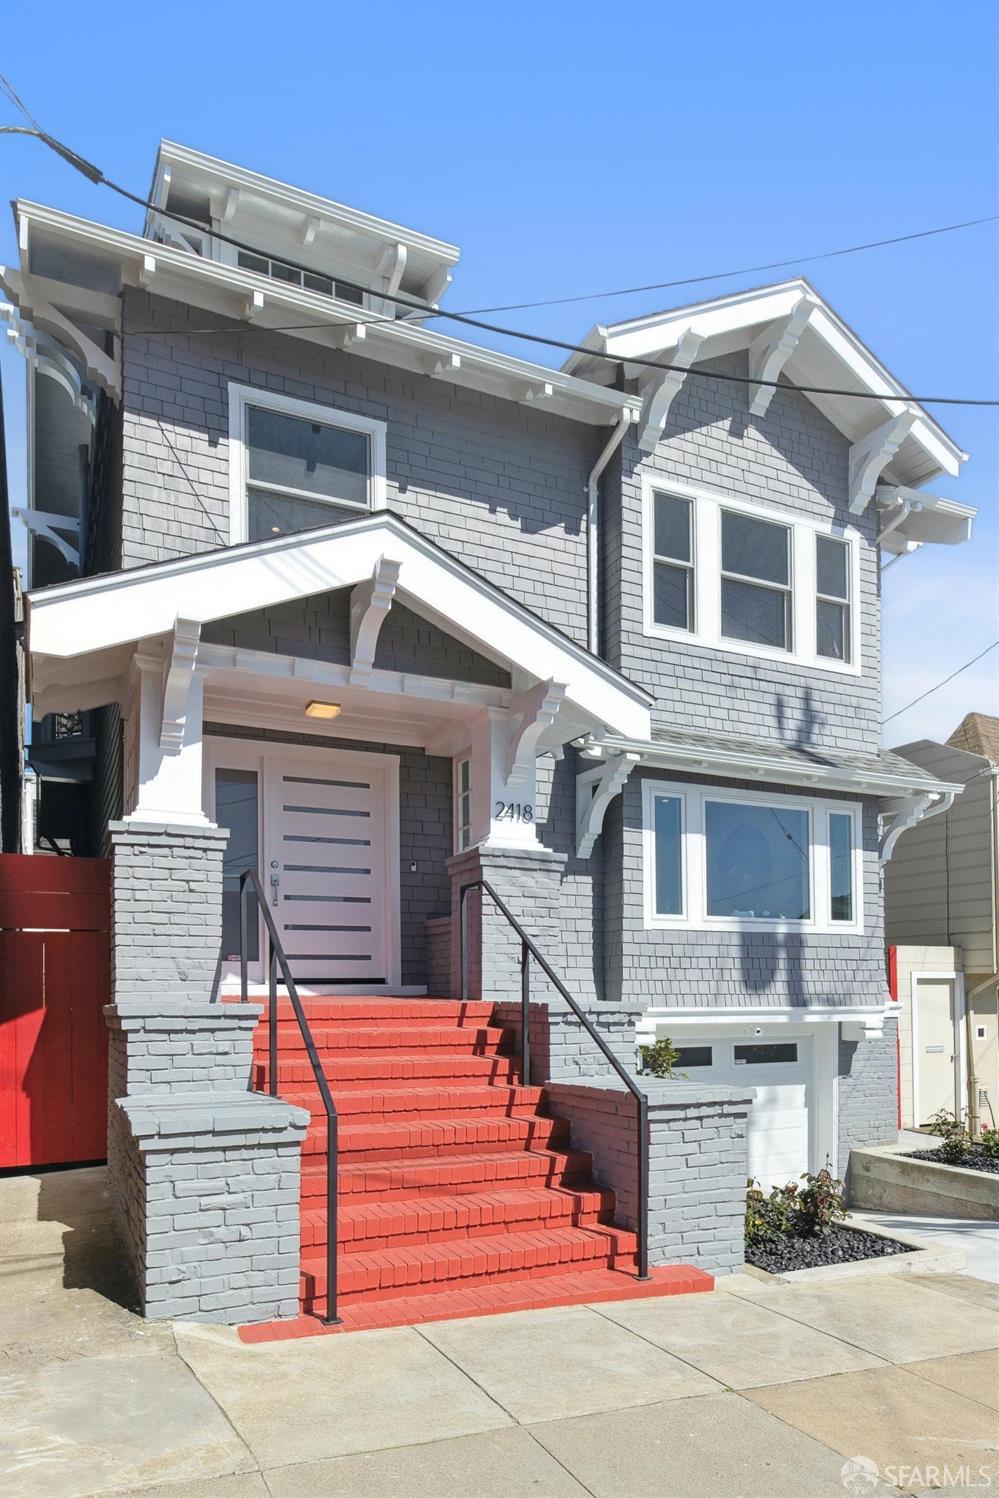 Photo of 2418 21st Ave in San Francisco, CA